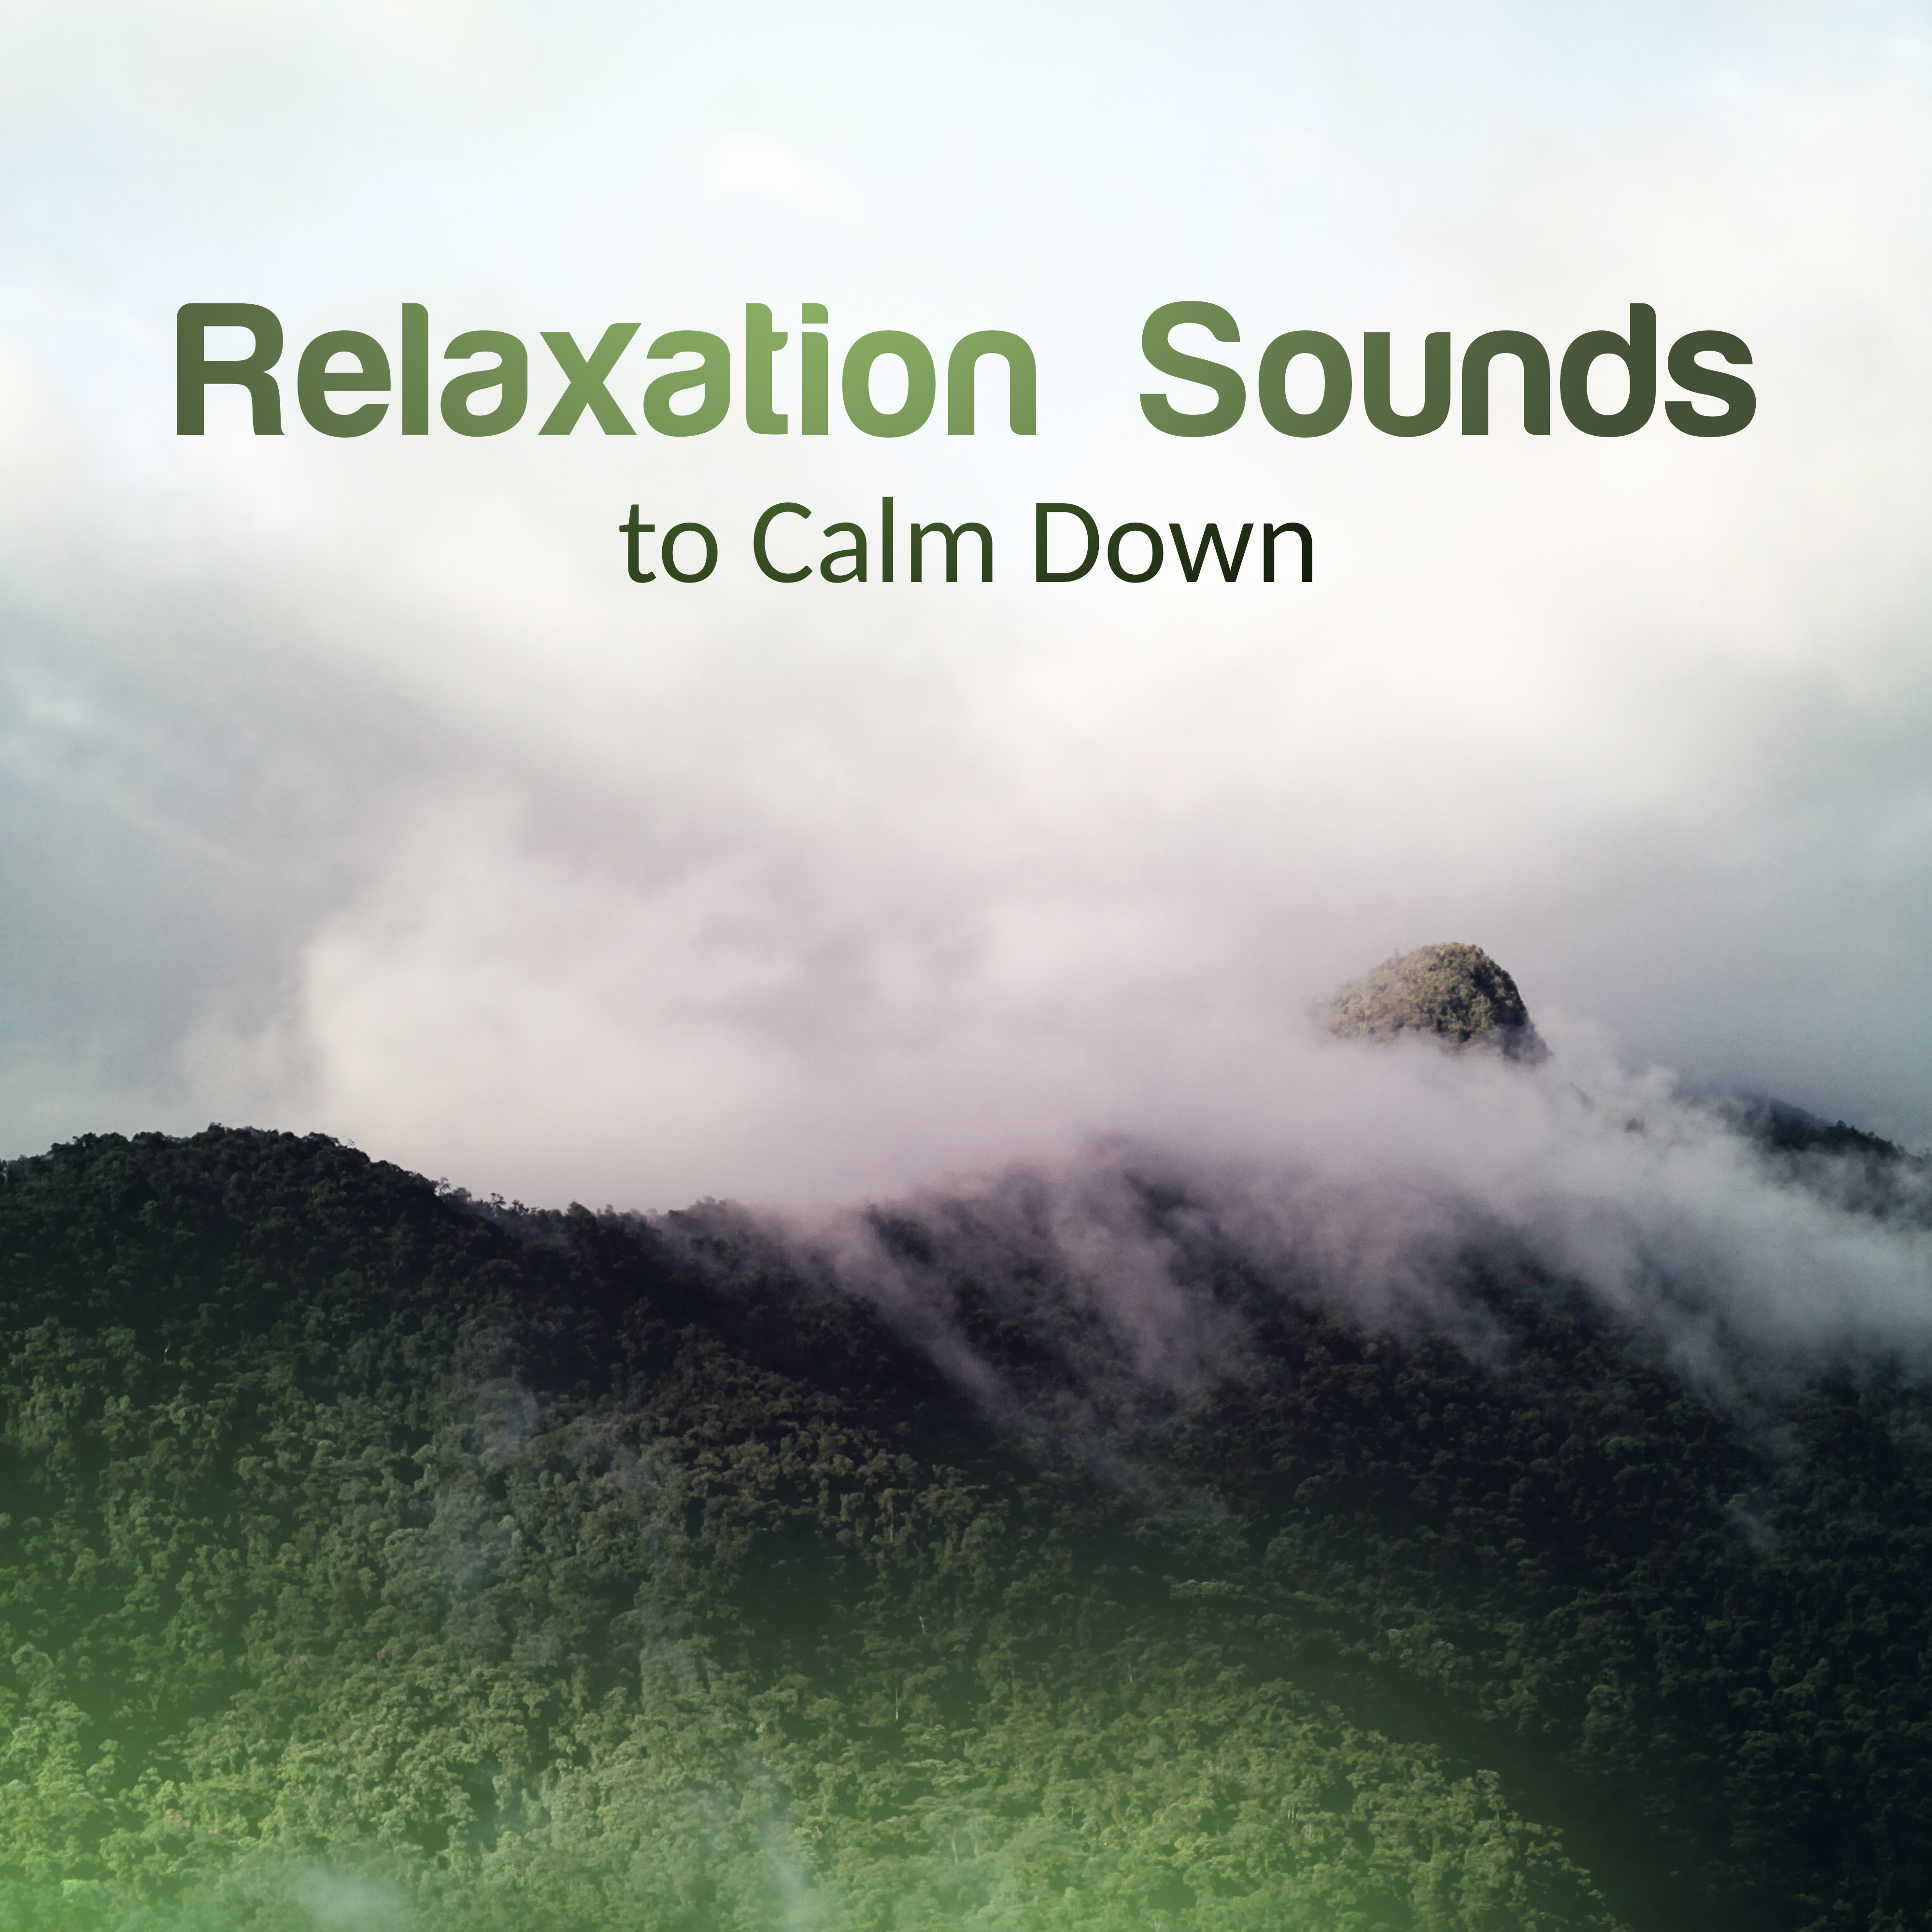 Relaxation Sounds to Calm Down  Healing Therapy, Inner Calmness, Mind Rest, New Age Music to Relax